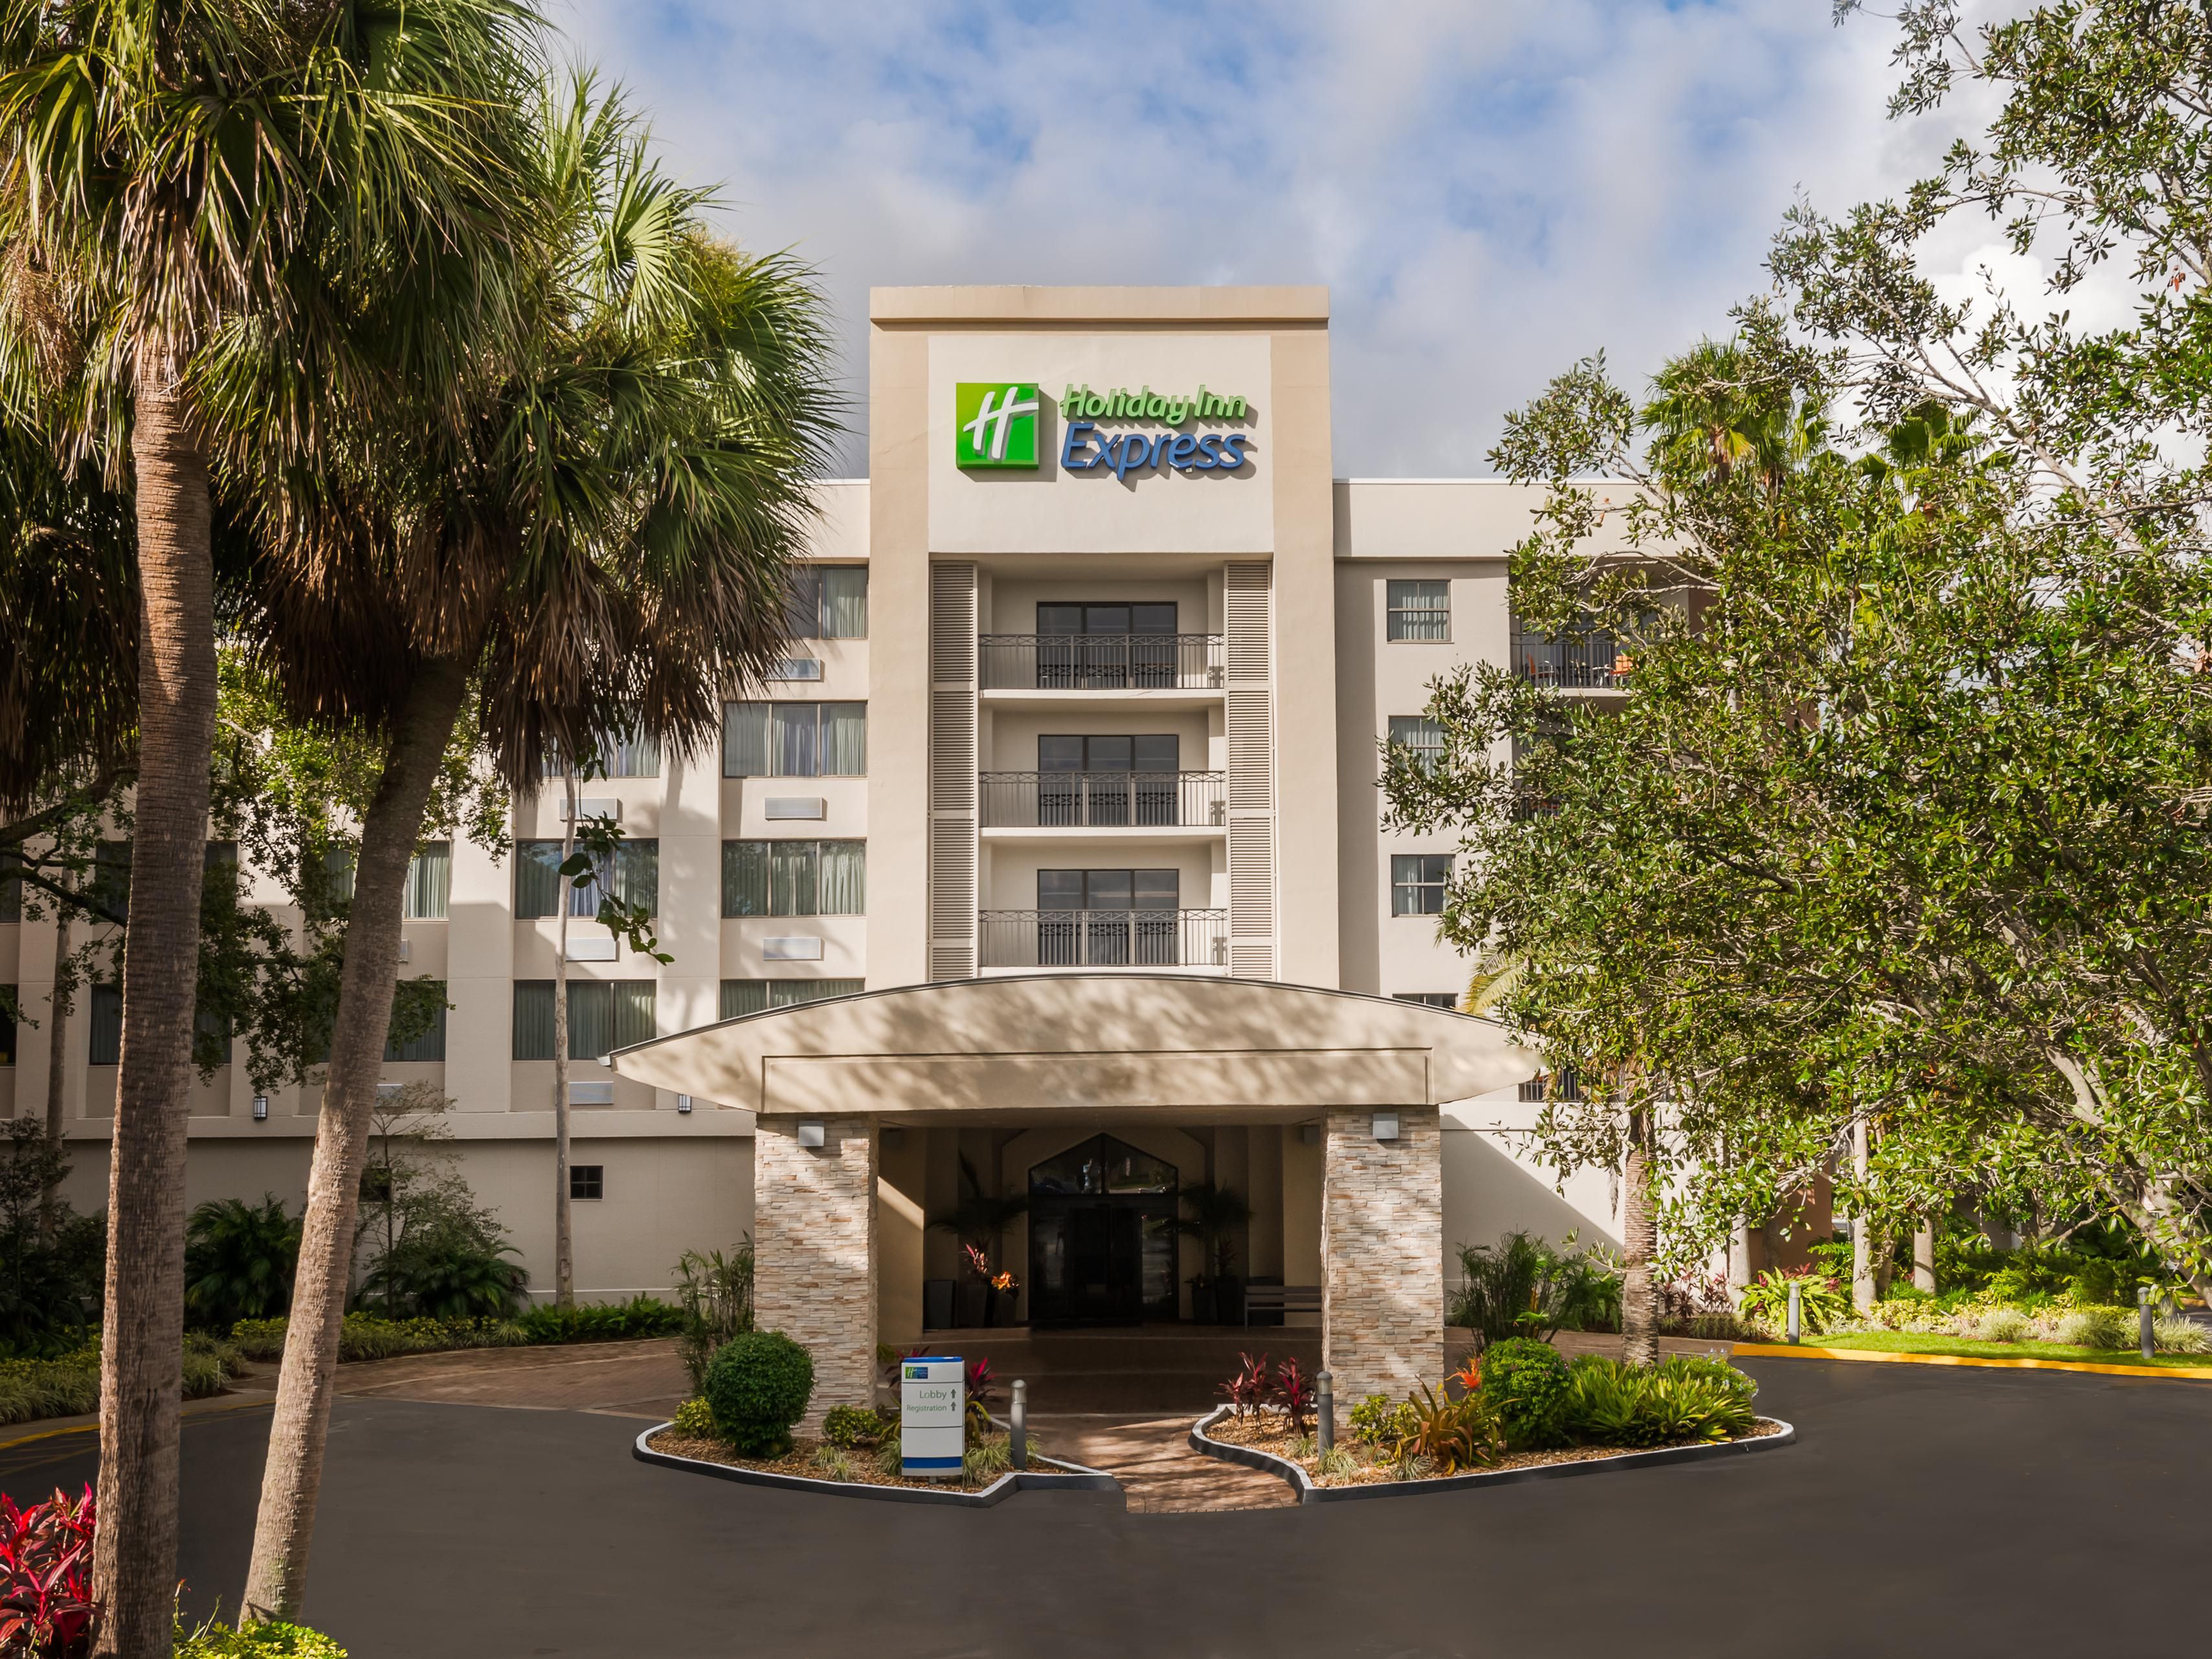 Hotels in Plantation, FL | Holiday Inn Express & Suites Ft. Lauderdale